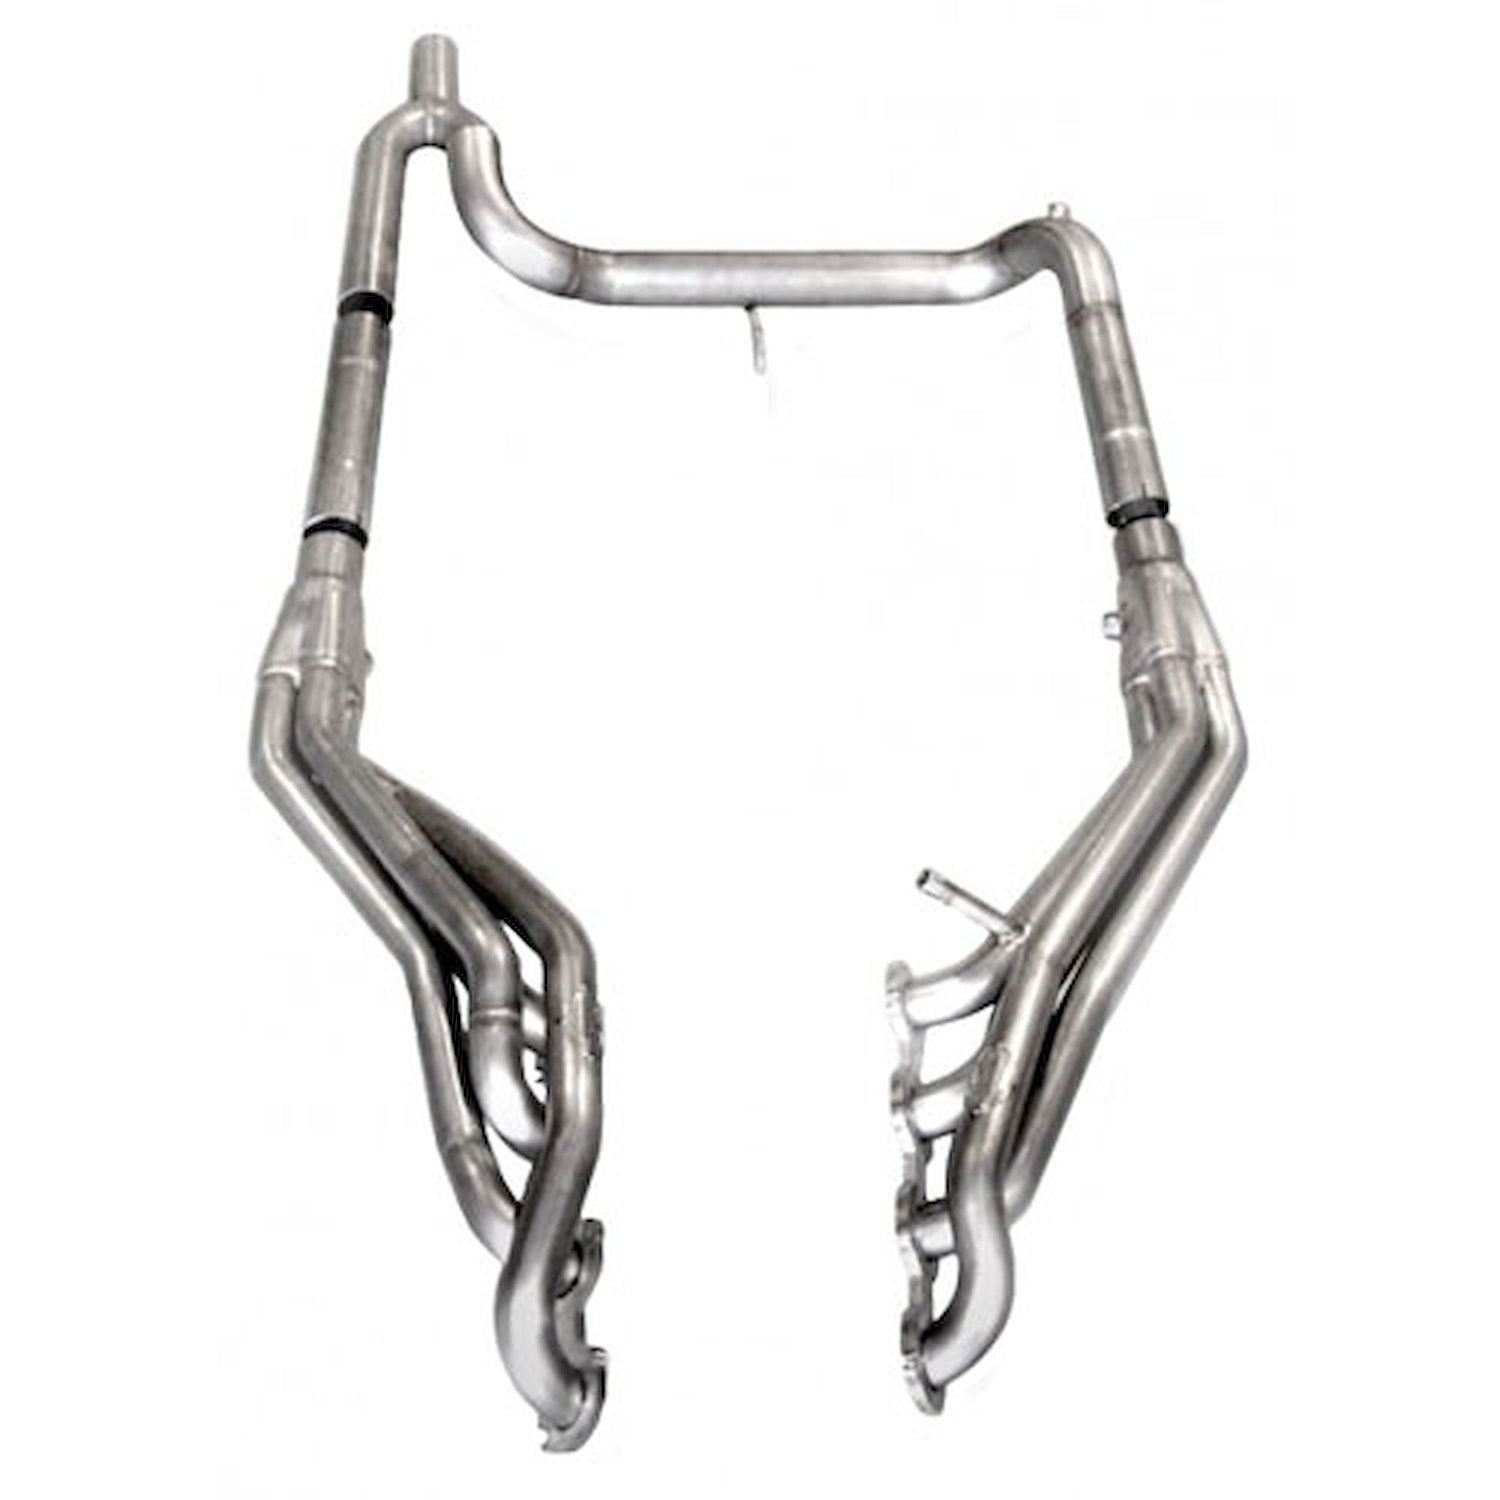 04-08 F150 4.6L HEADERS WITH 1-5/8 PRIMARIES WITH